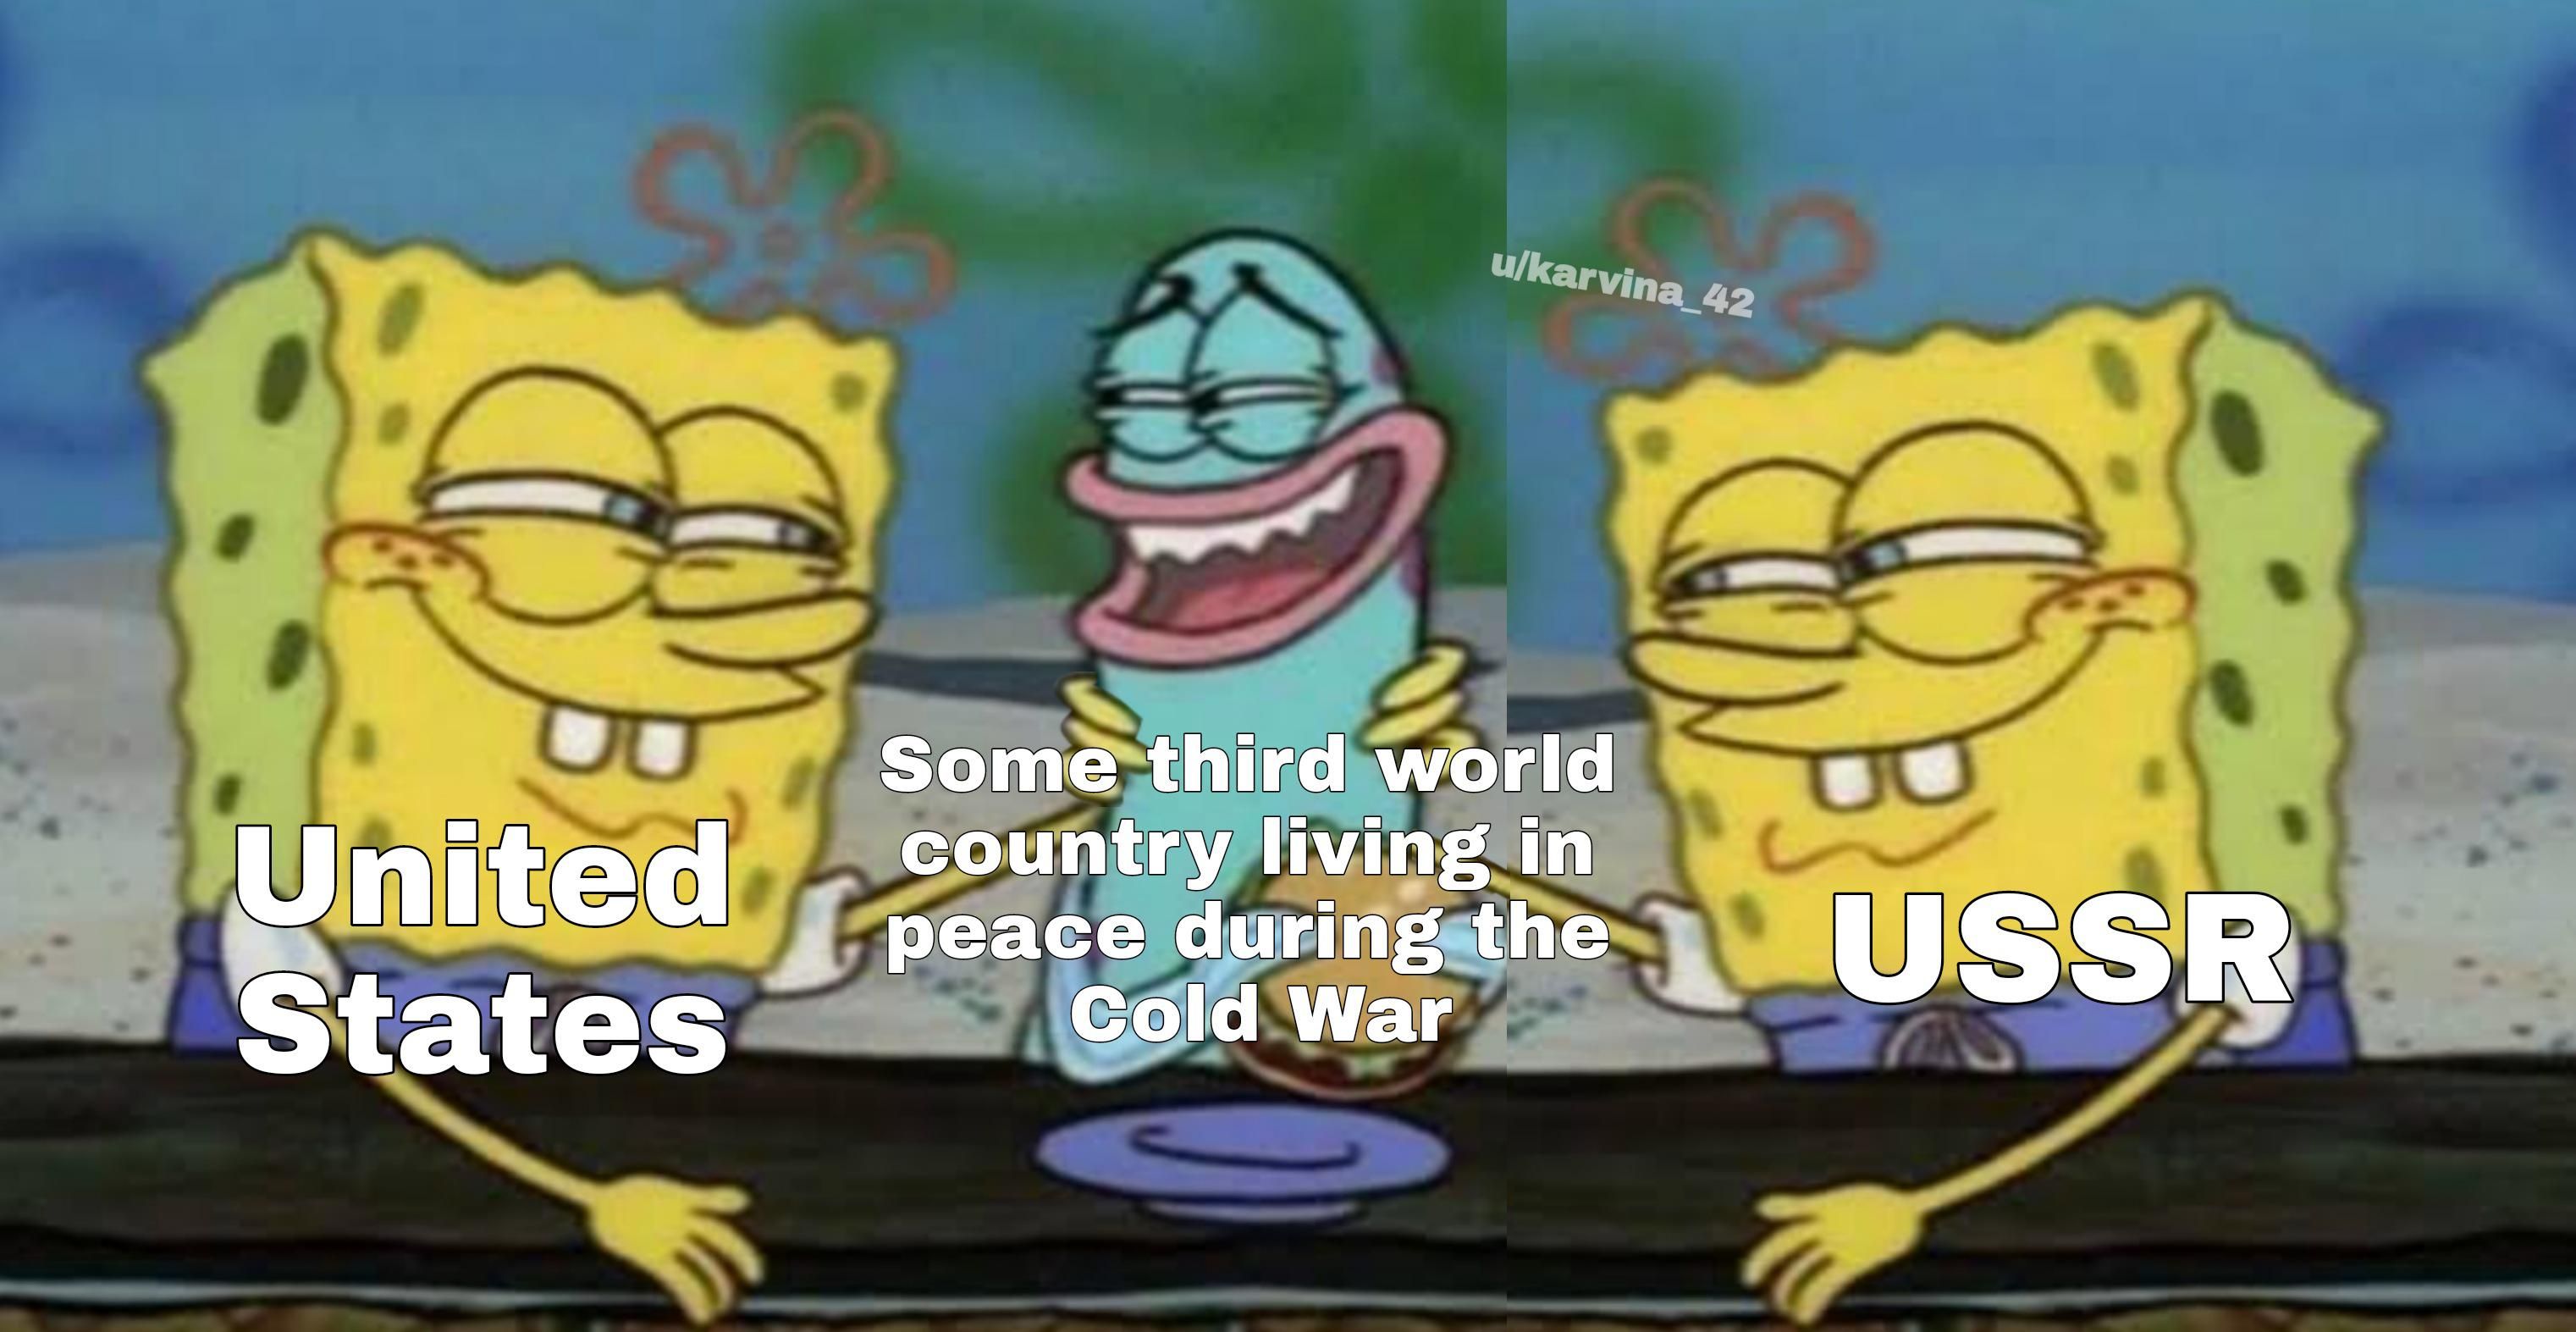 Third world countries were like meeting places for the two countries